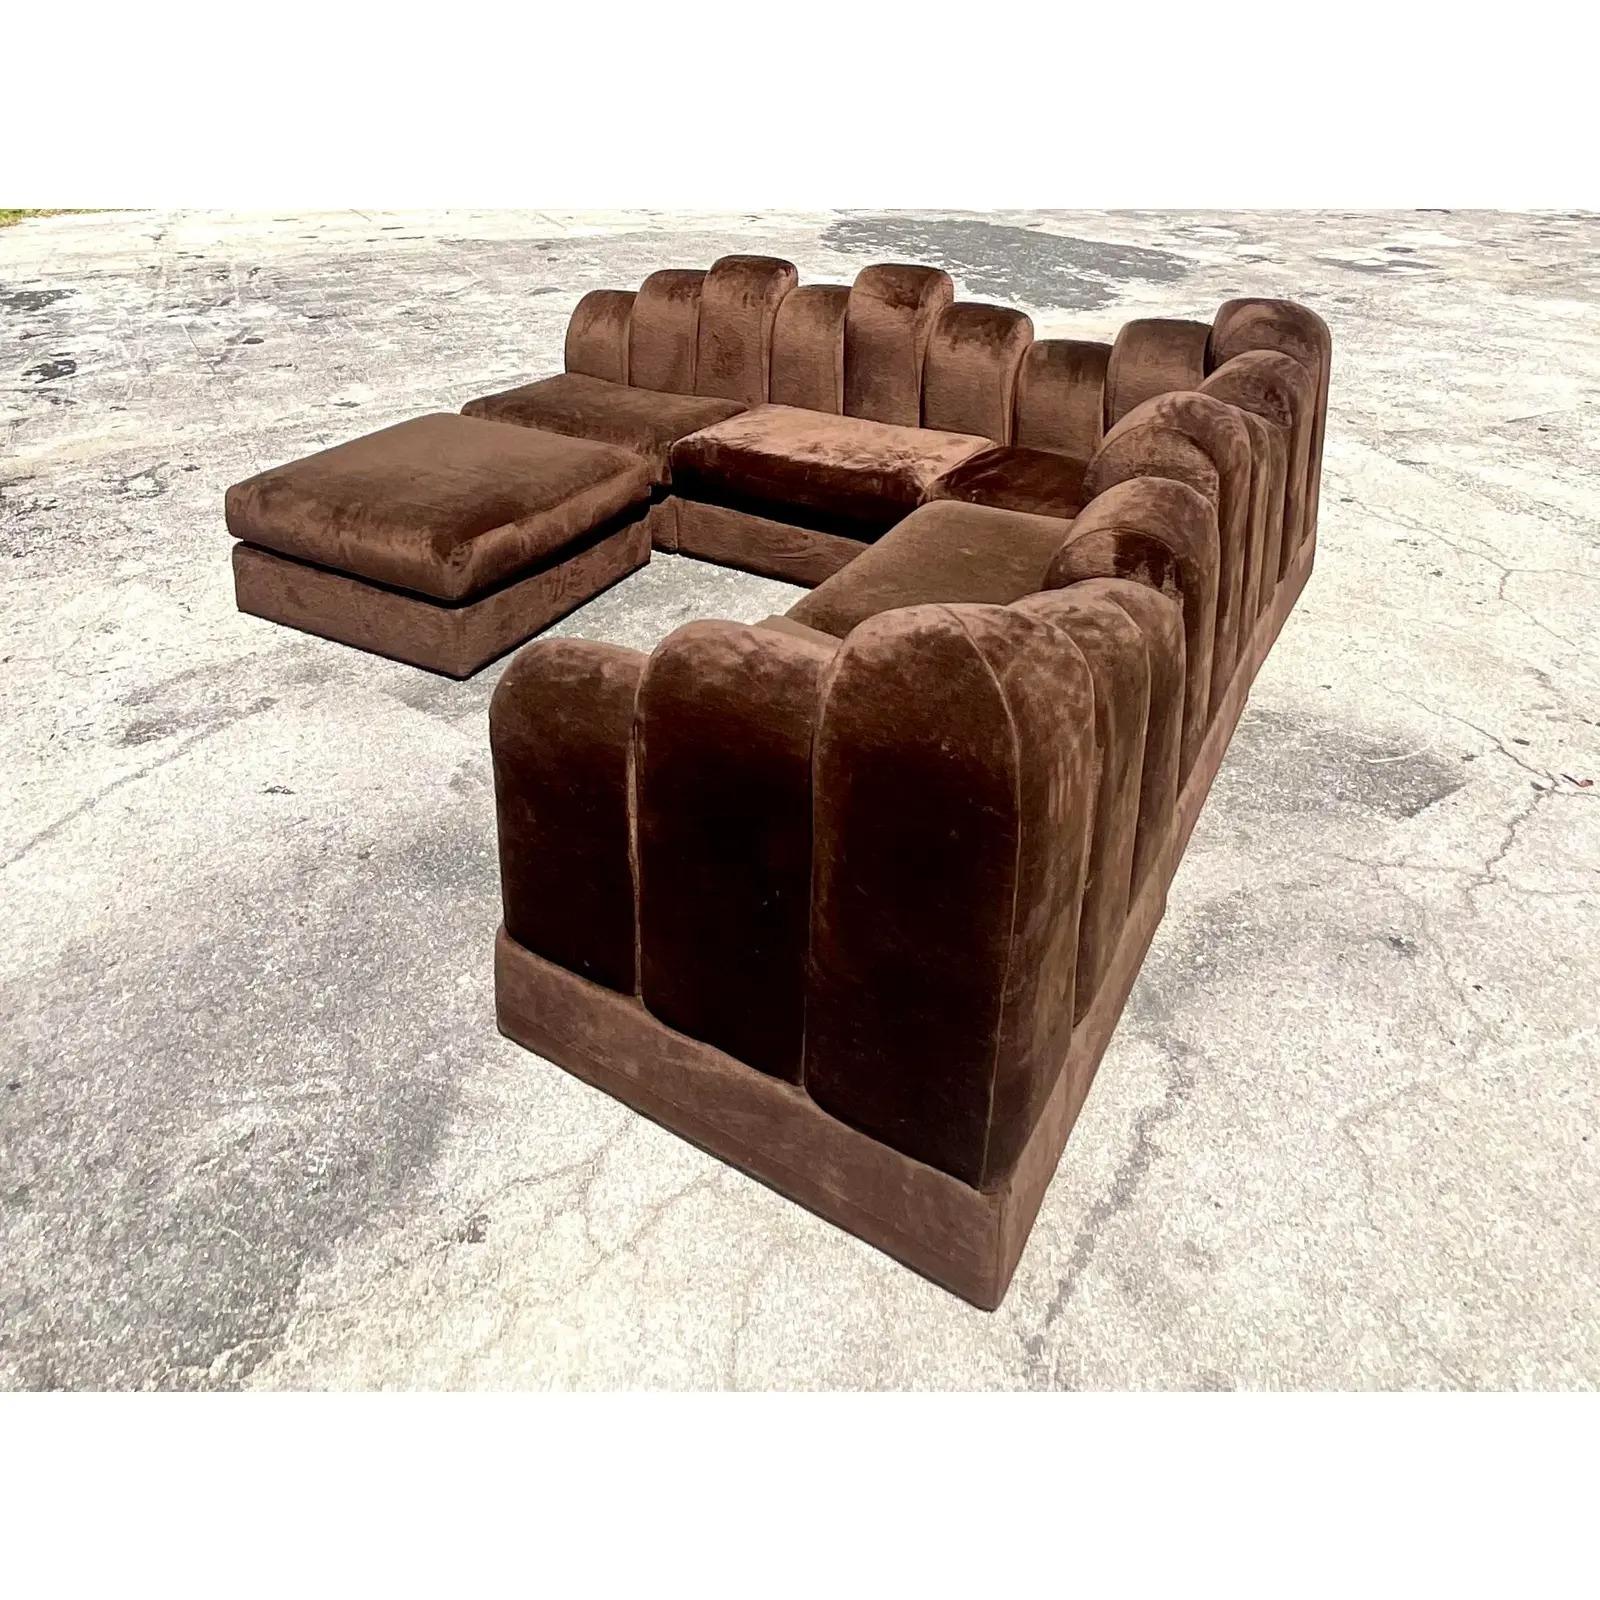 70s style couch